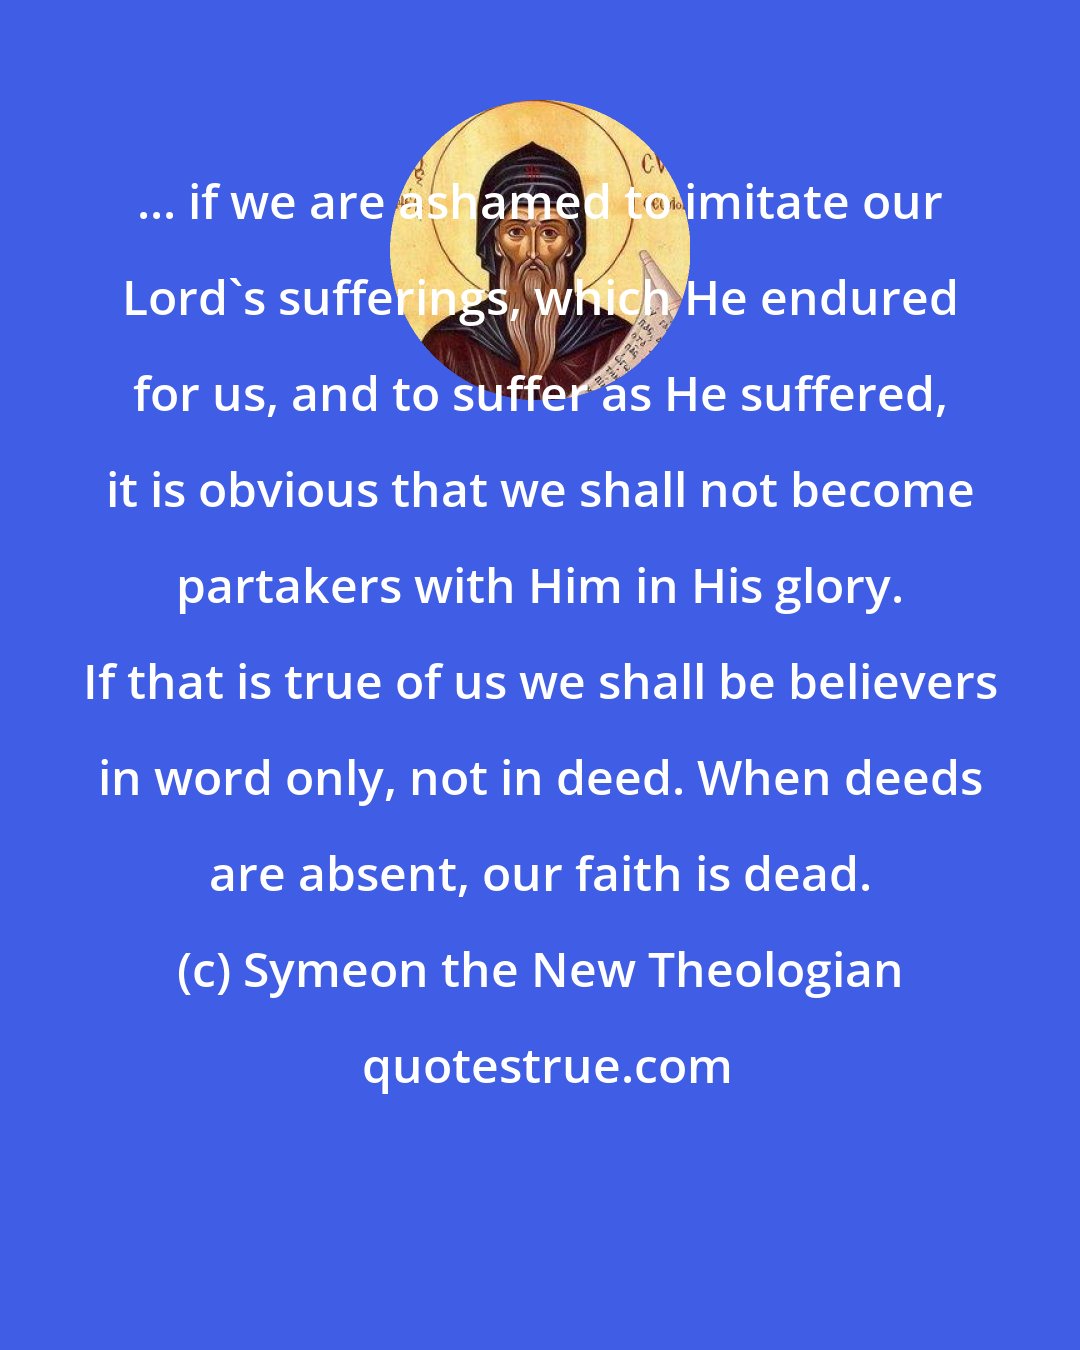 Symeon the New Theologian: ... if we are ashamed to imitate our Lord's sufferings, which He endured for us, and to suffer as He suffered, it is obvious that we shall not become partakers with Him in His glory. If that is true of us we shall be believers in word only, not in deed. When deeds are absent, our faith is dead.